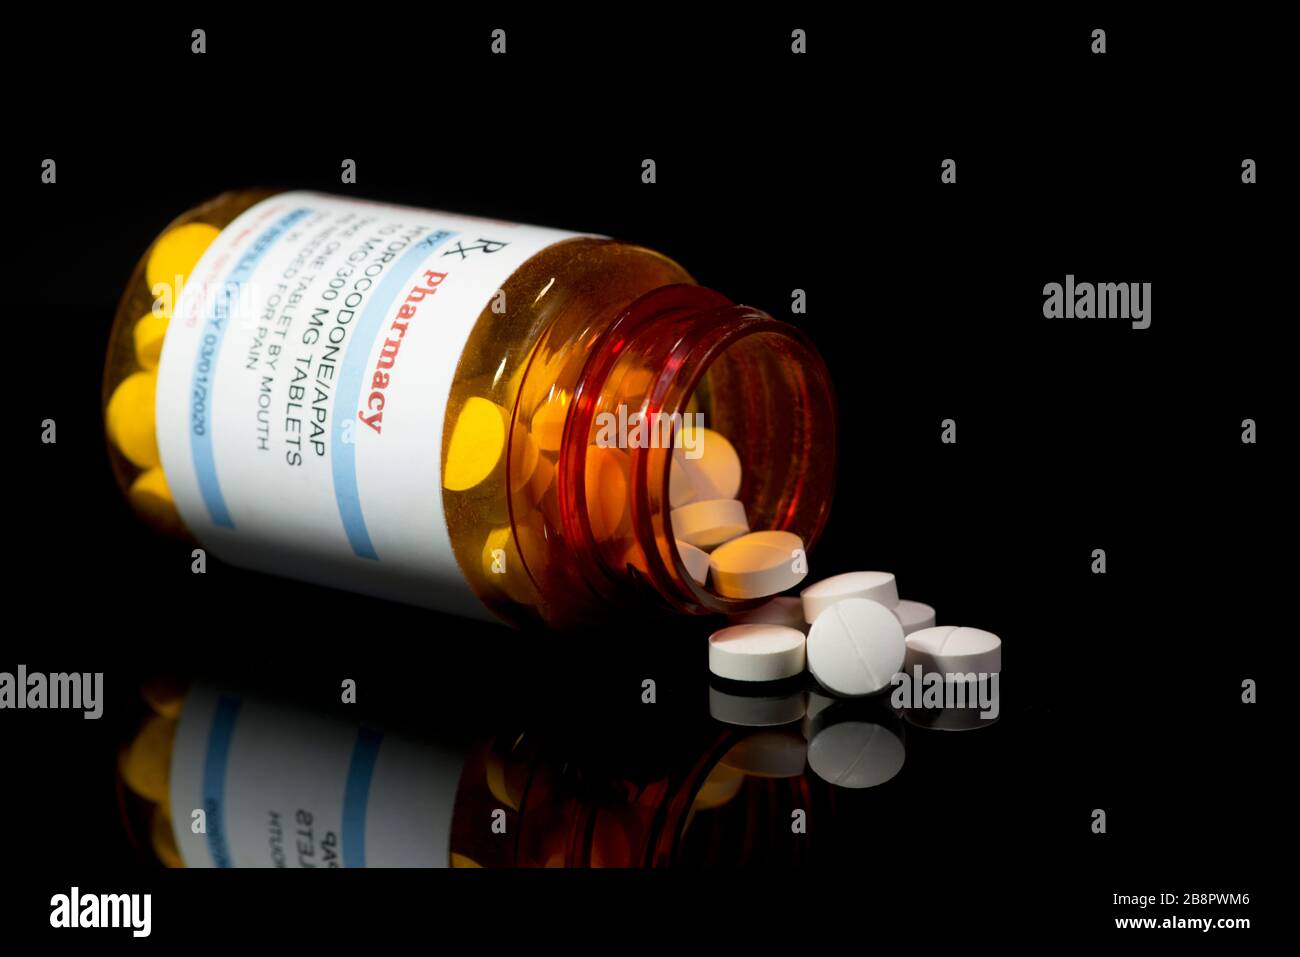 Hydrocodone/APAP acetaminophen prescription bottle with white tablets on black background. Stock Photo